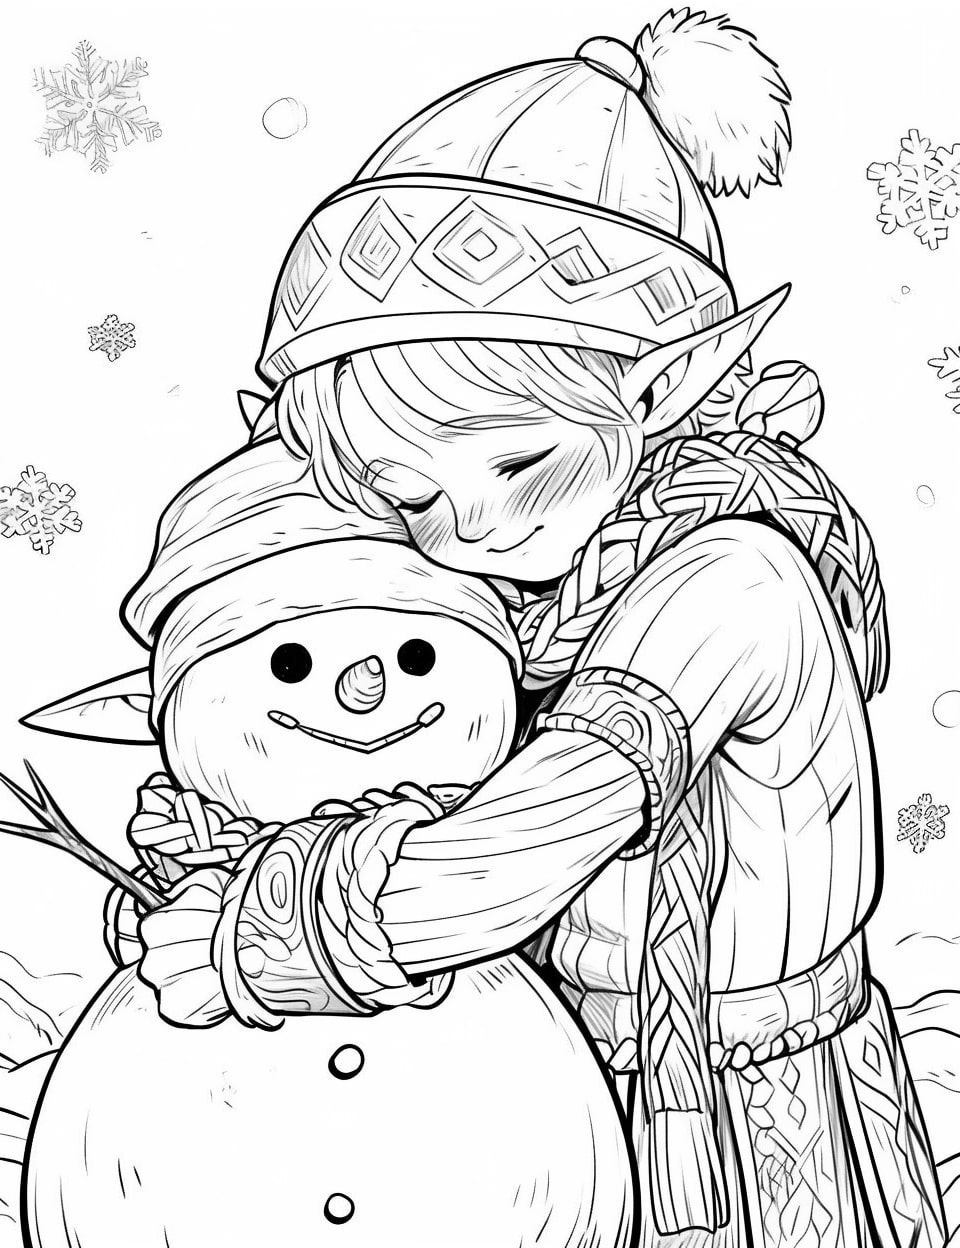 Snowman coloring pages for kids and adults